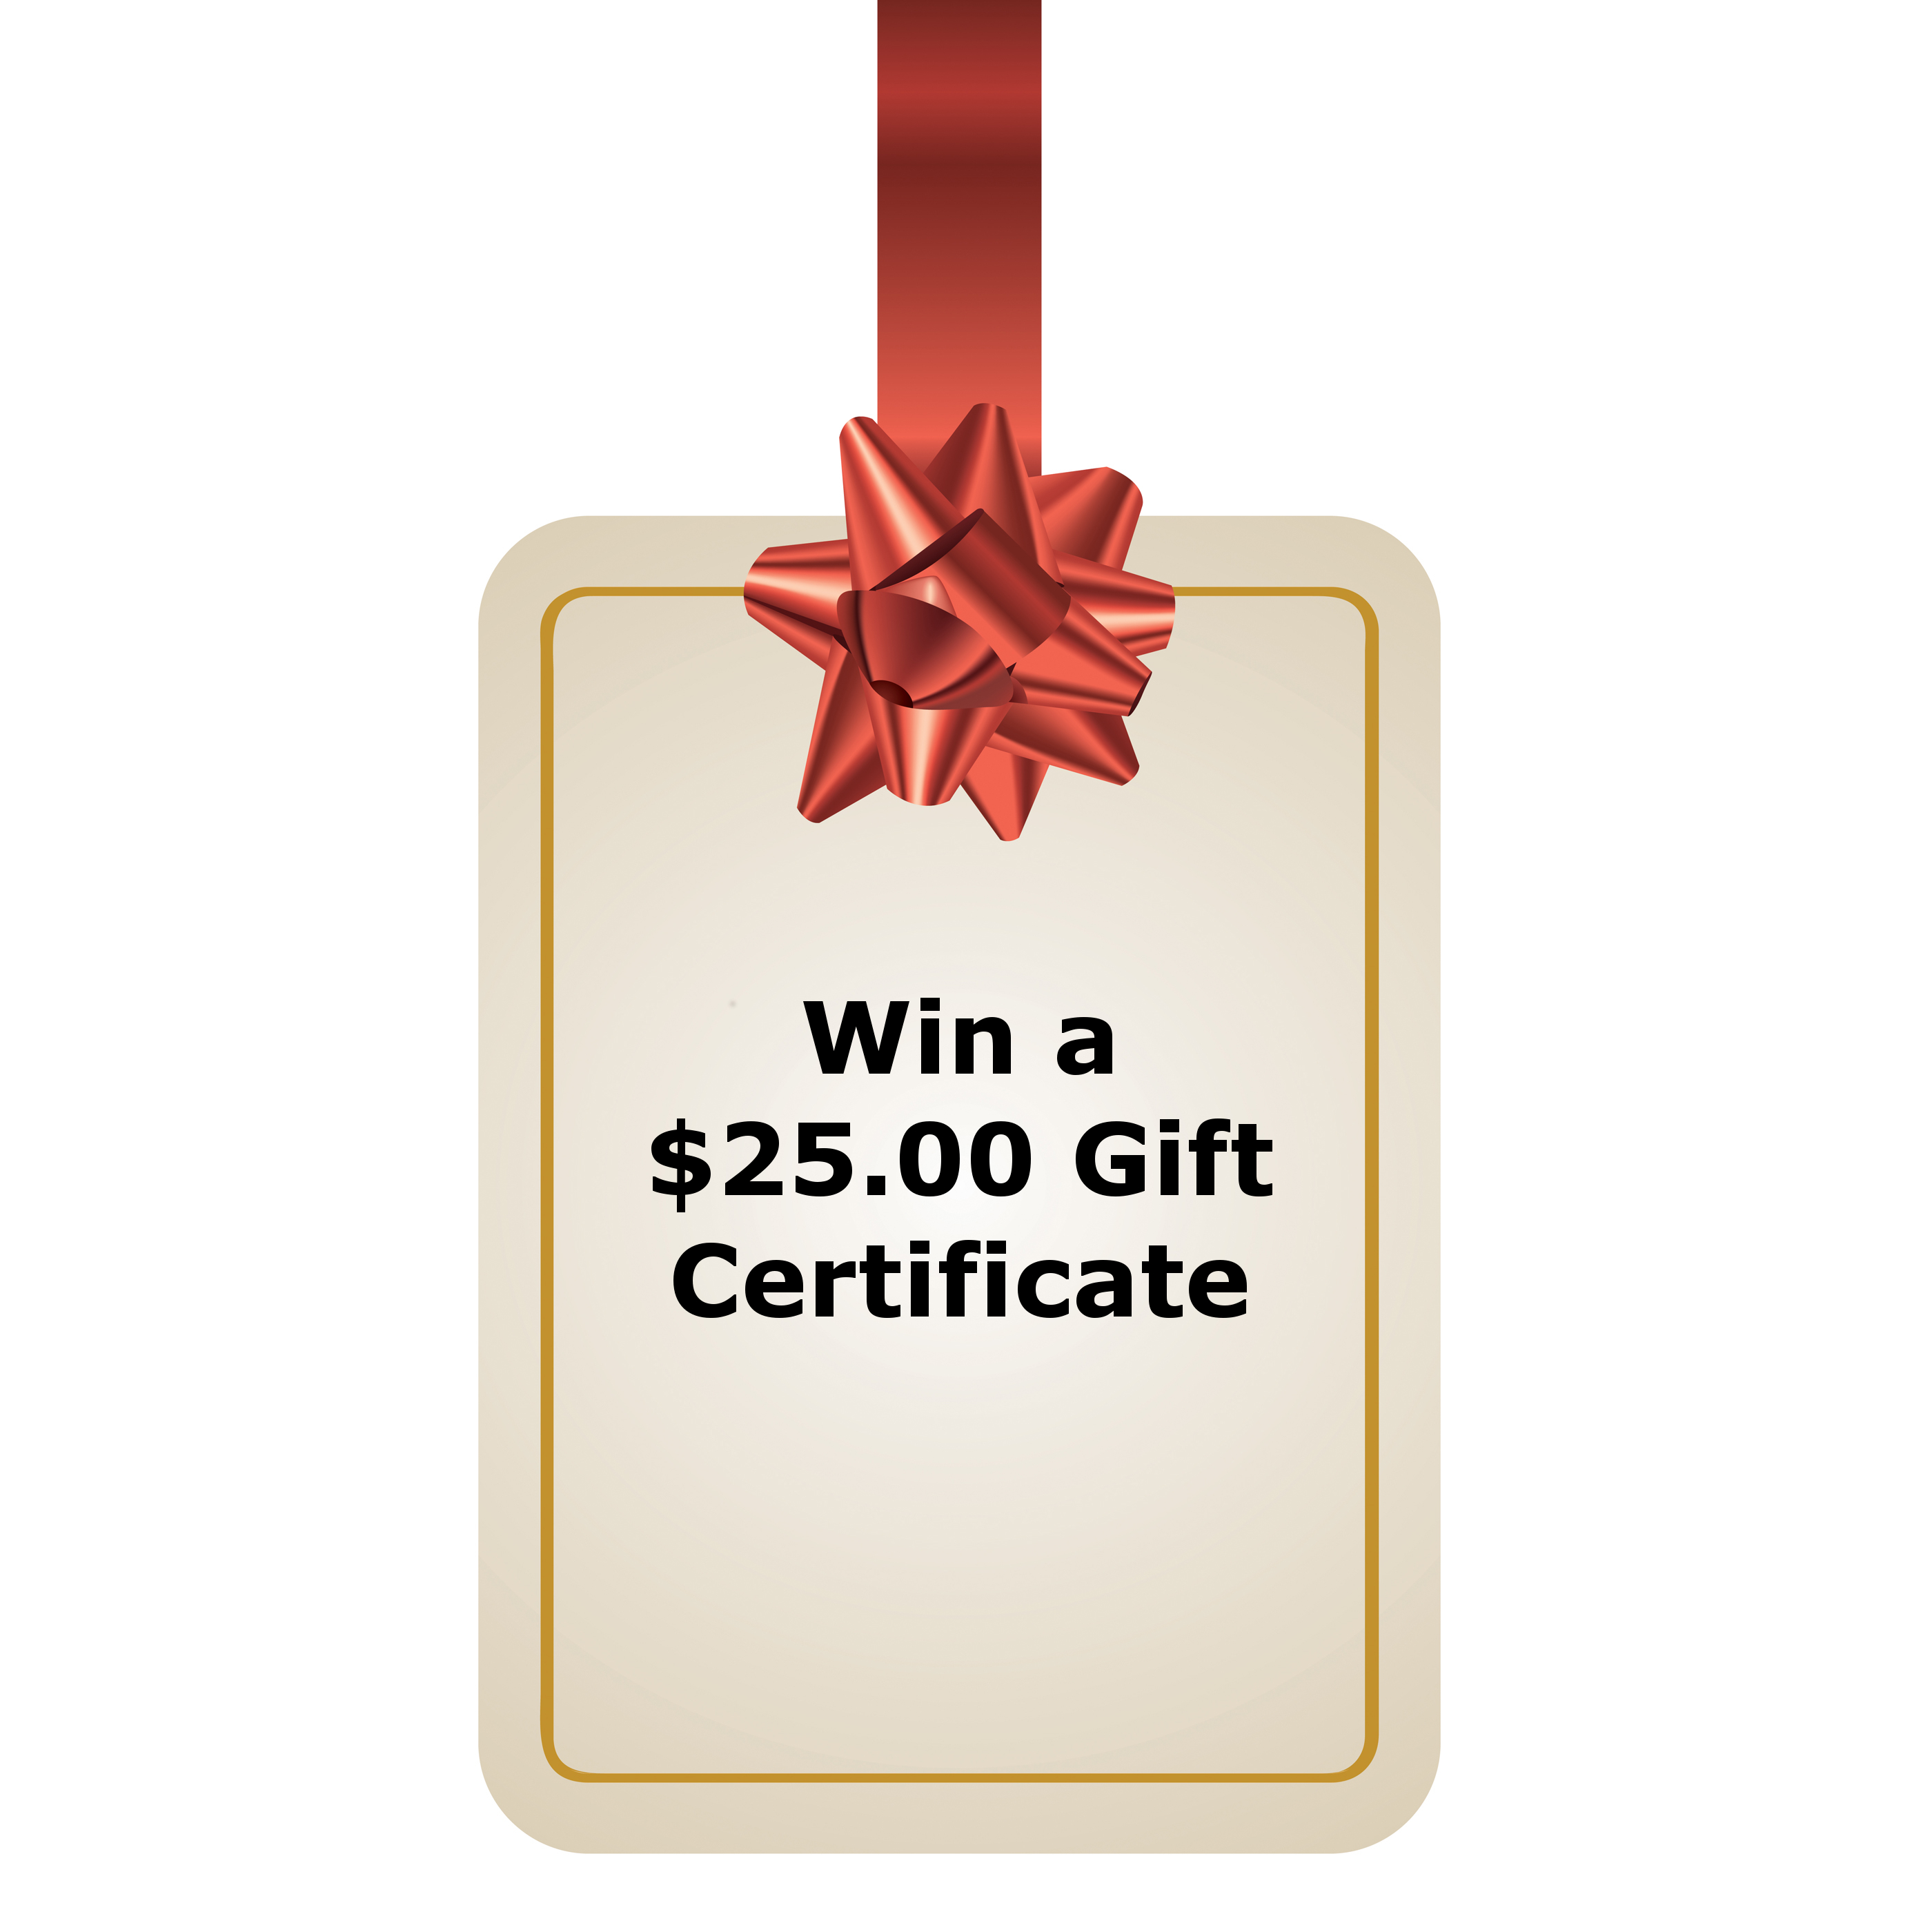 Complimentary $25 Gift Certificate To The First 25 Customers On Cyber Monday